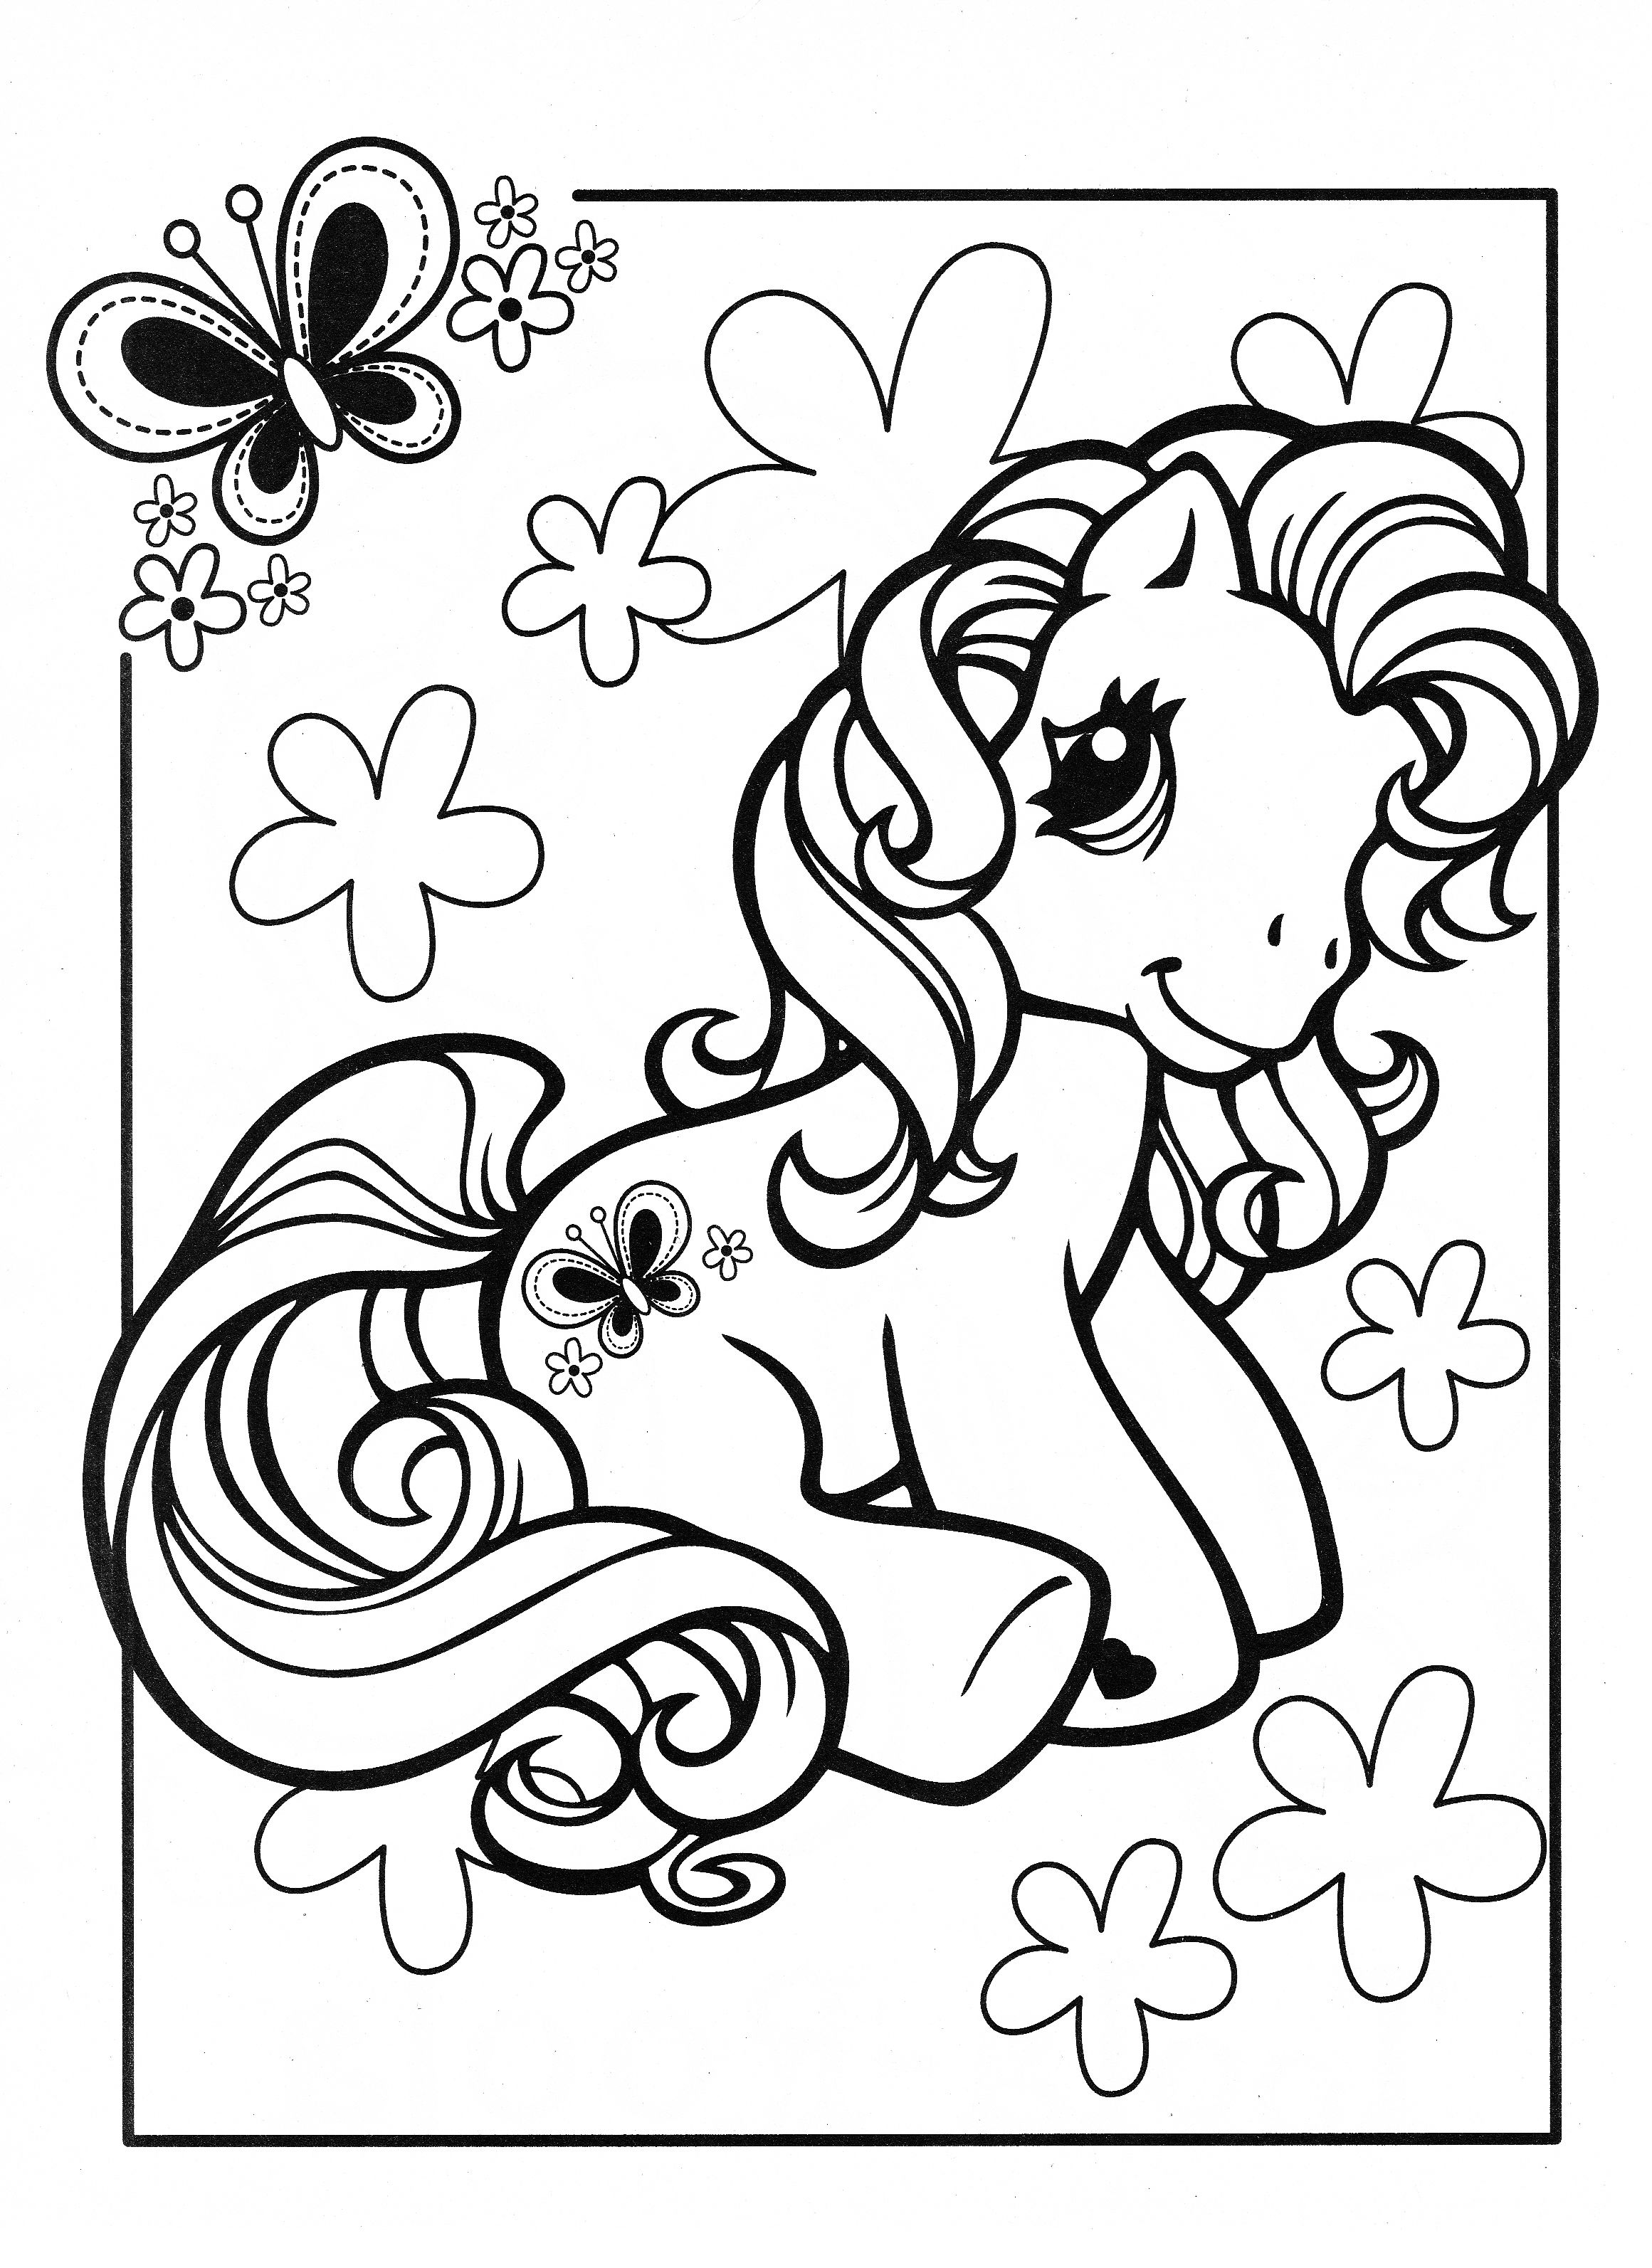 62 Unicorn Coloring Pages My Little Pony  Latest